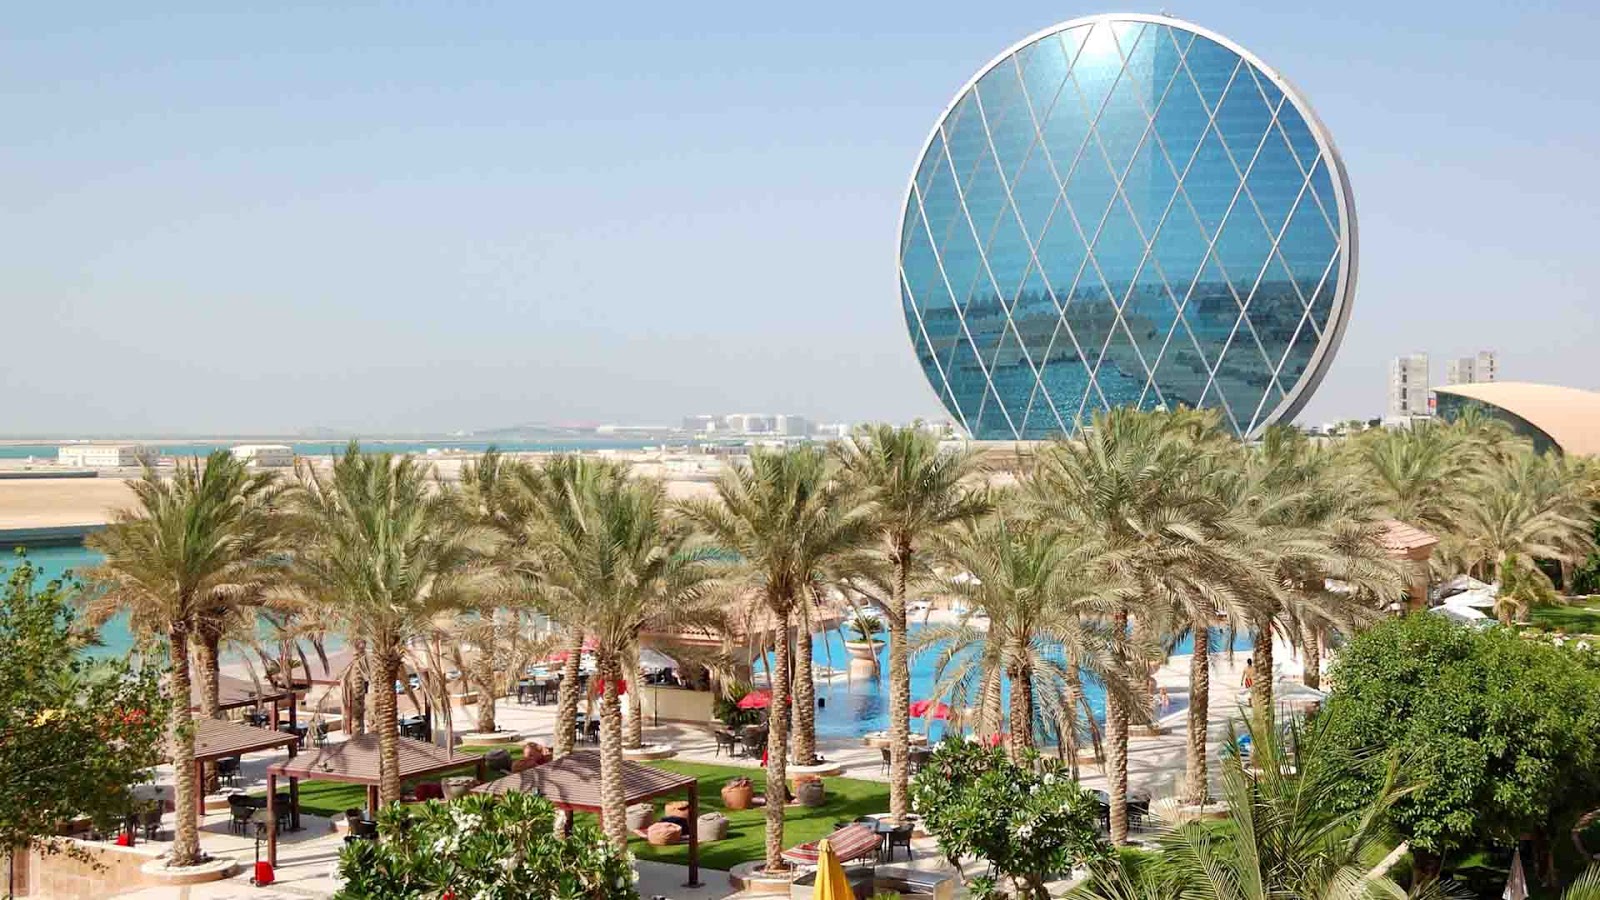  Abu  Dhabi HD Wallpapers  High Definition Free Background